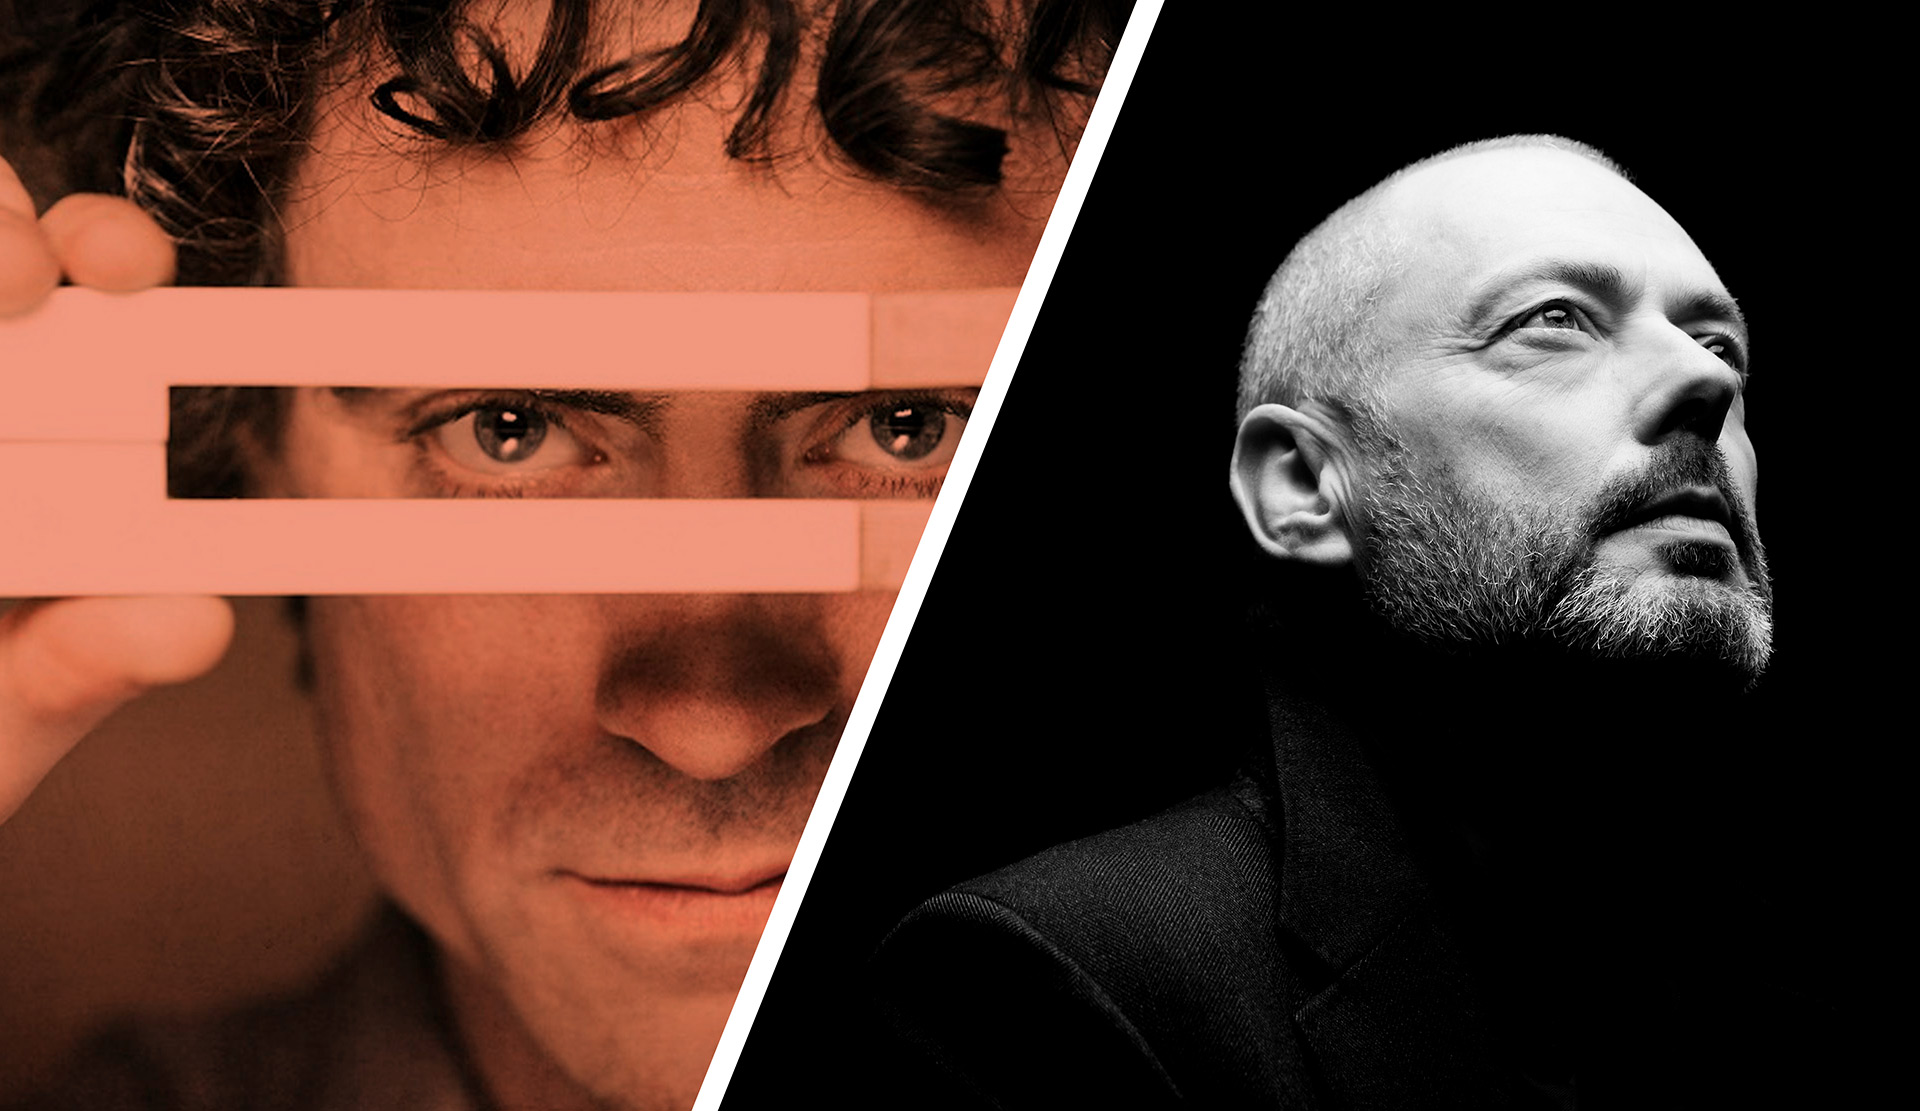 Paul Lewis and Mark Padmore